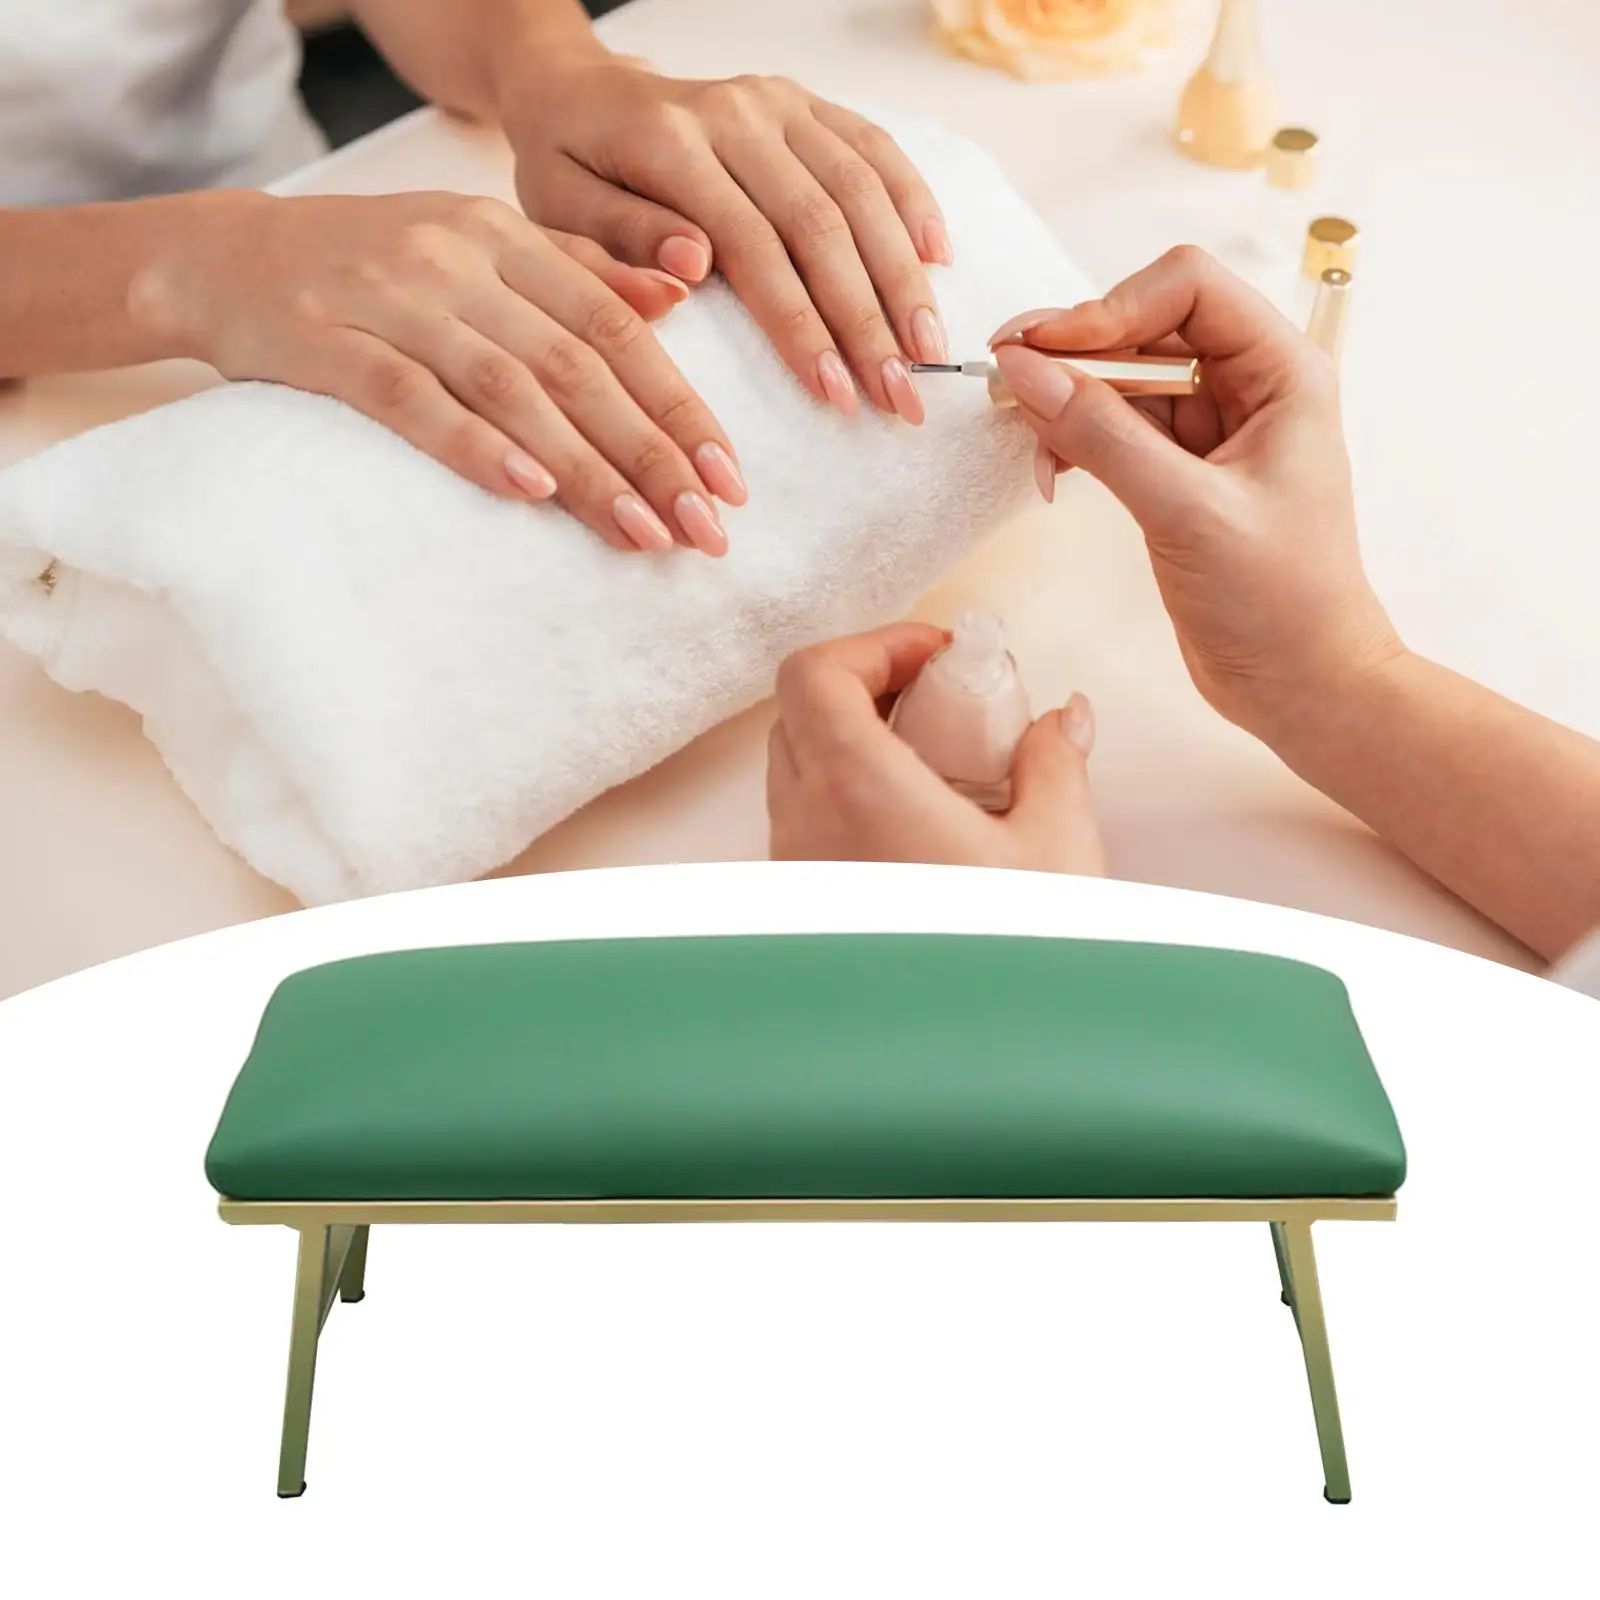 Hand Rest for Nail Non Slip Comfortable Premium Table Nail Arm Rest Cushion for Salon Manicurist Home Nail Technician Use Arm